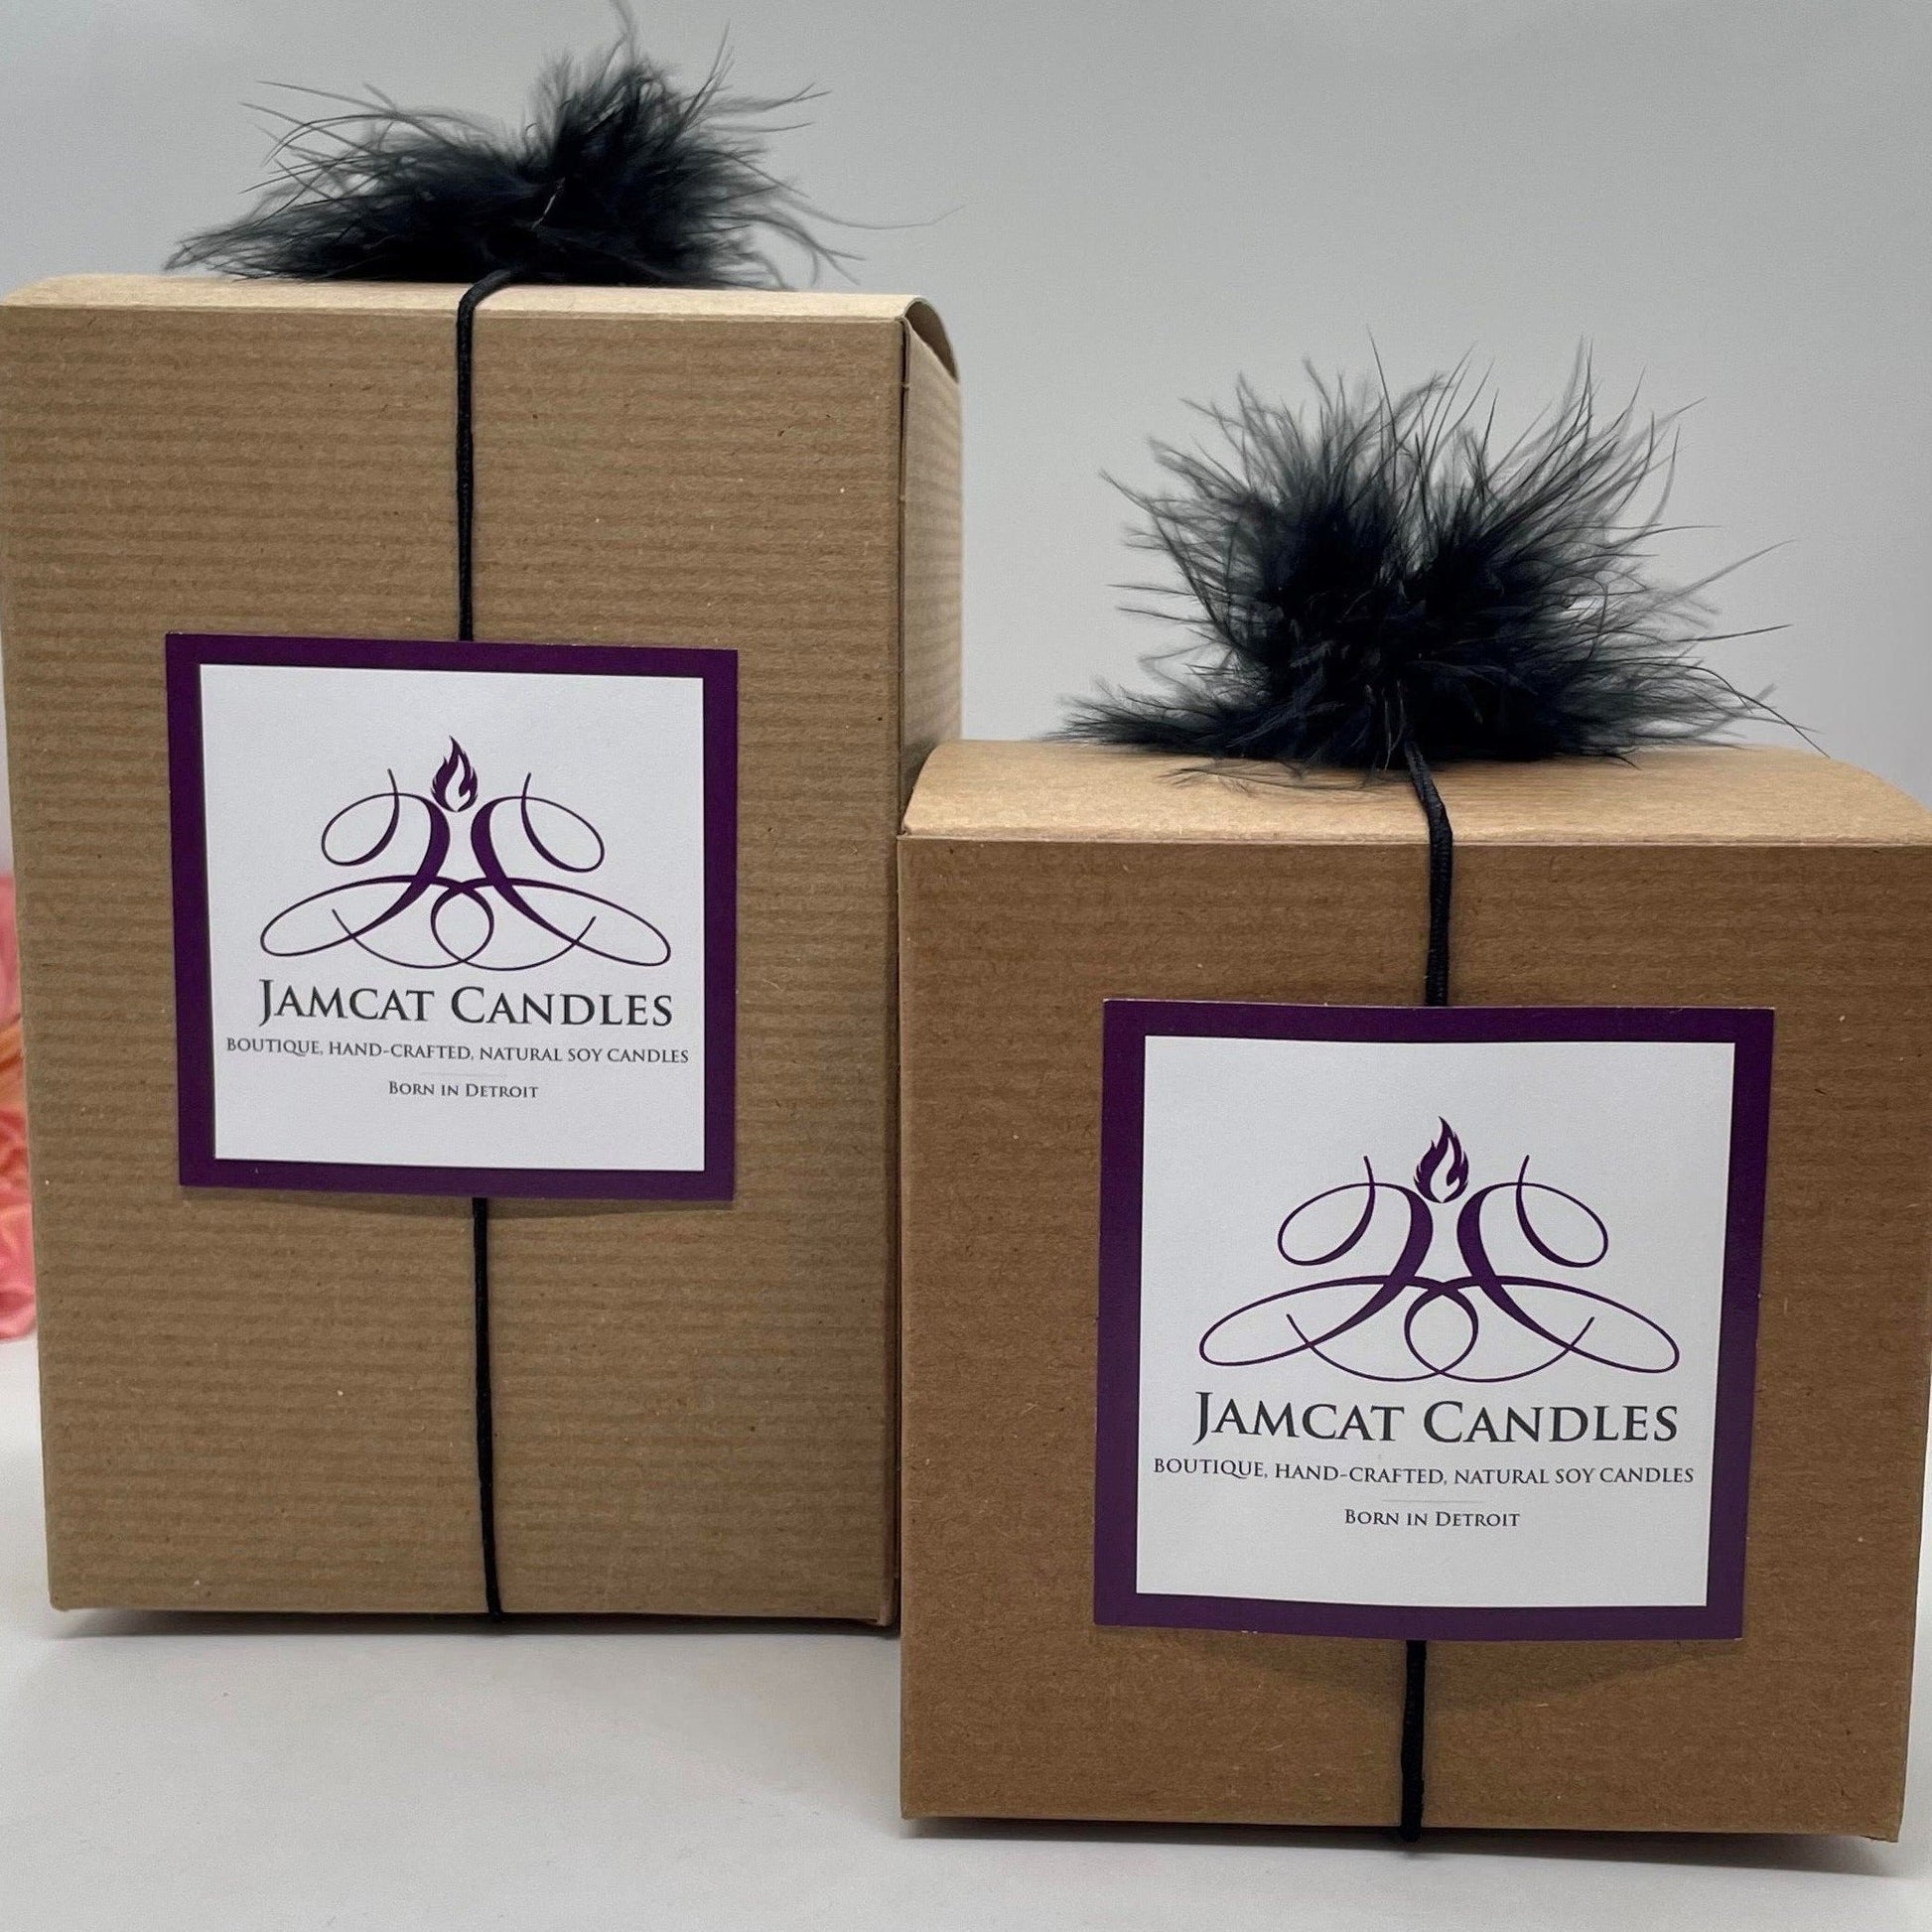 WELCOME TO THE JUNGLE - Jamcat Candles